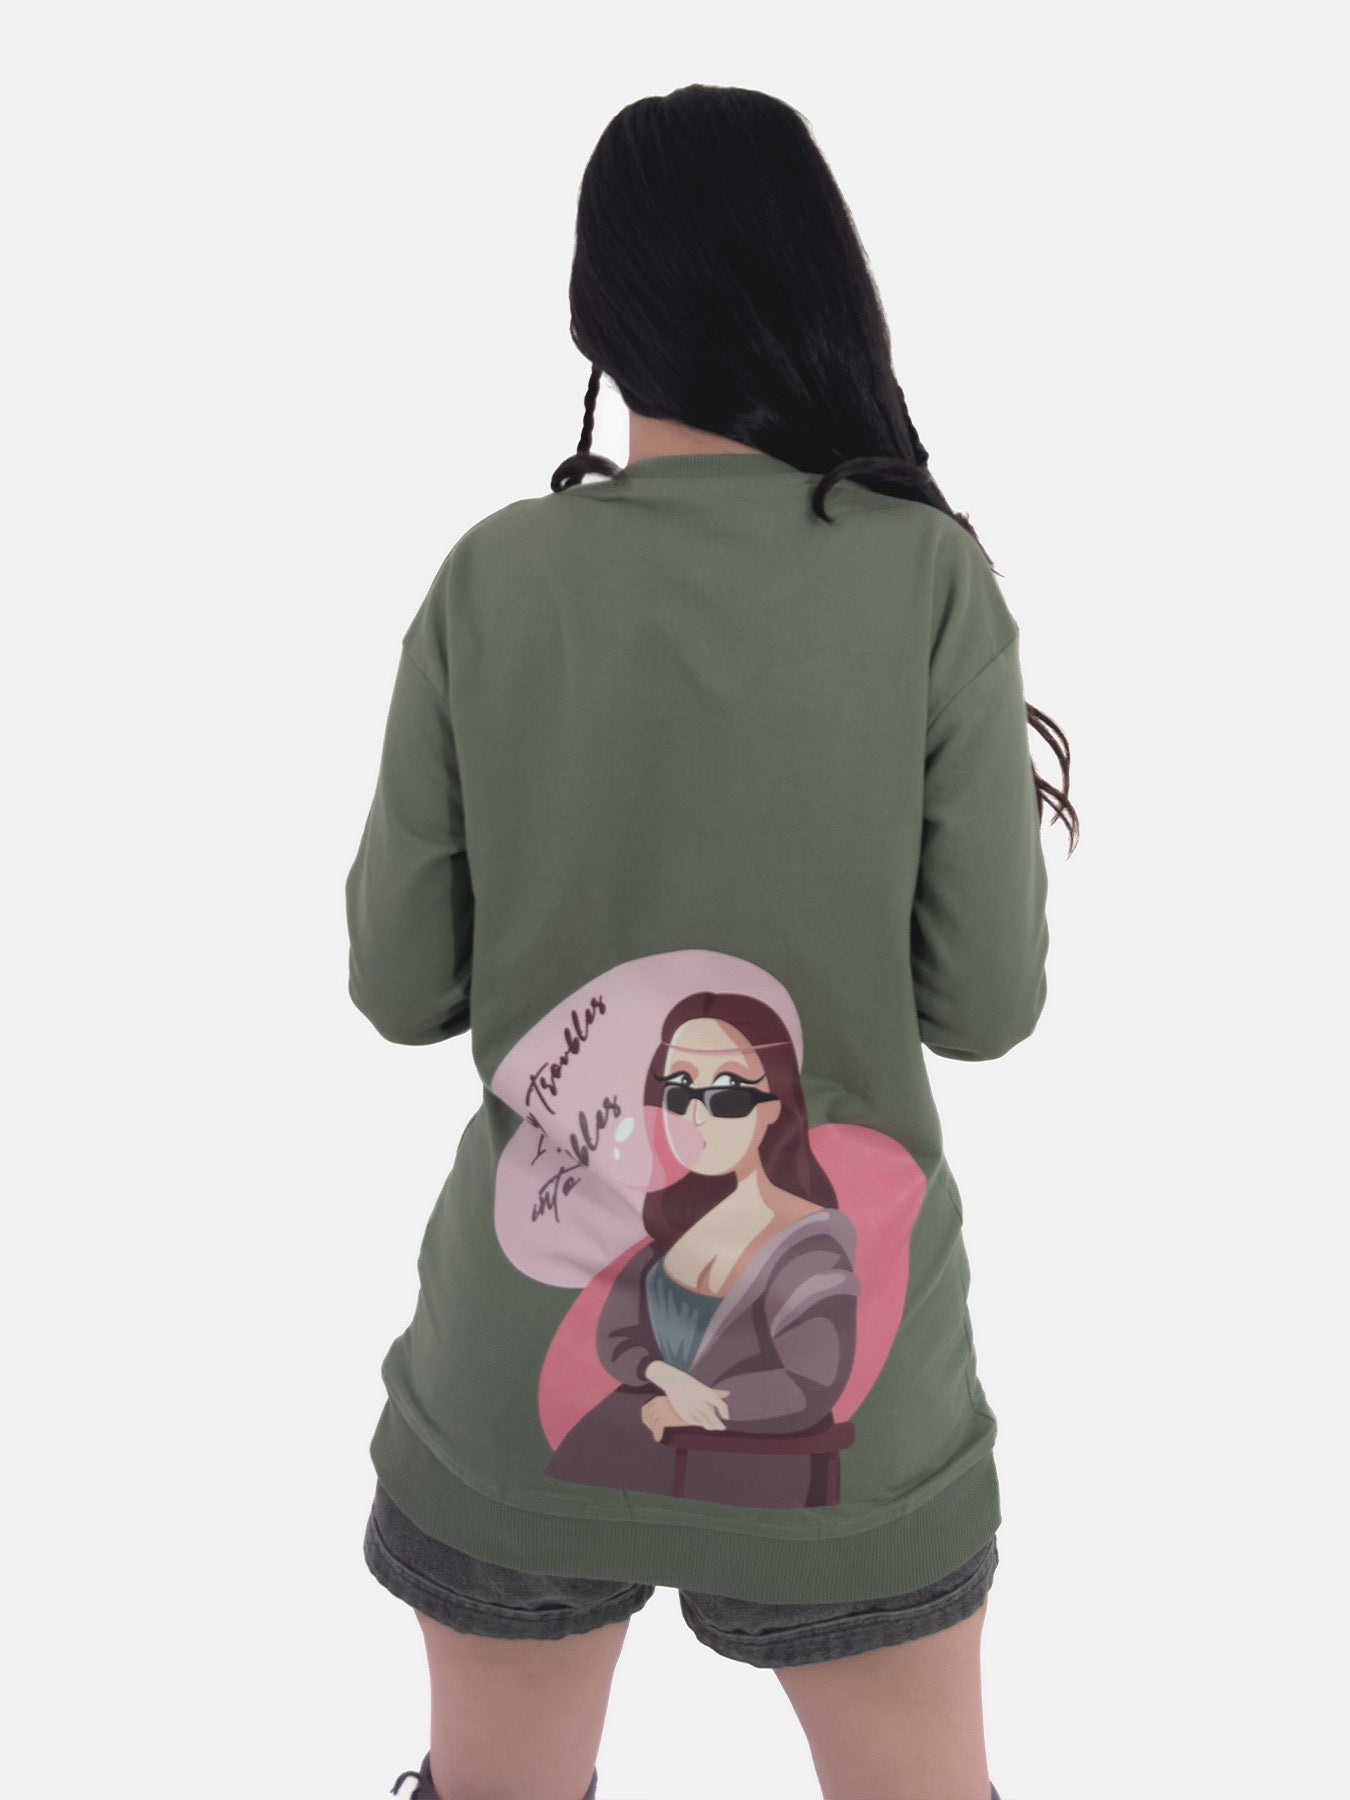 Troubles into Bubbles Printed Sweatshirt - keos.life